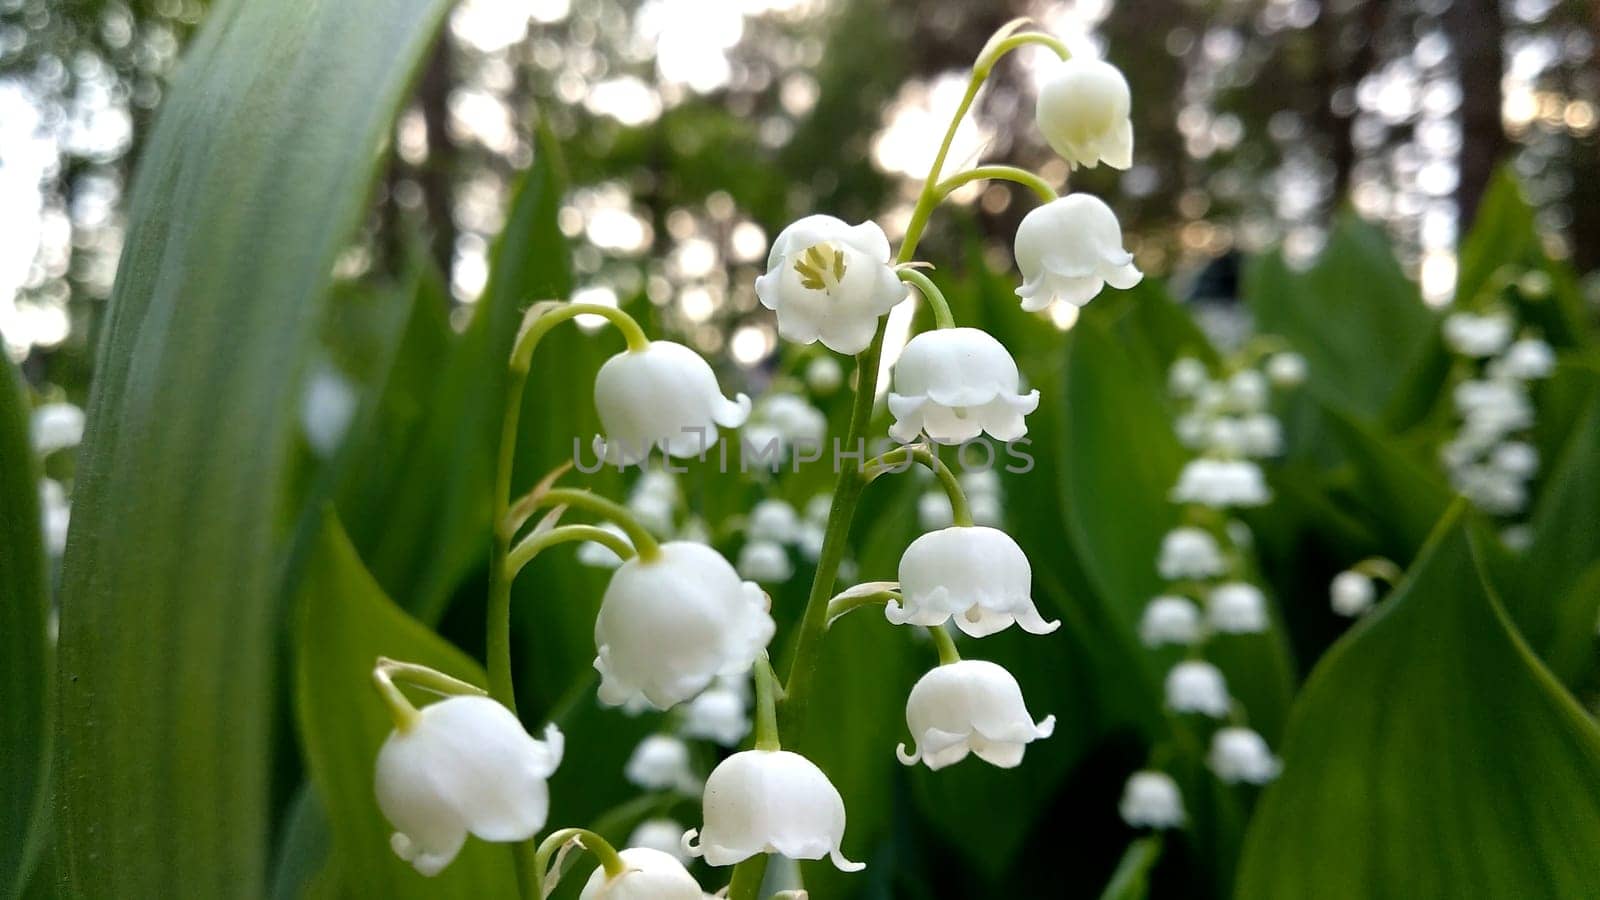 Lily of the valley flowers in the spring in the forest. by DovidPro